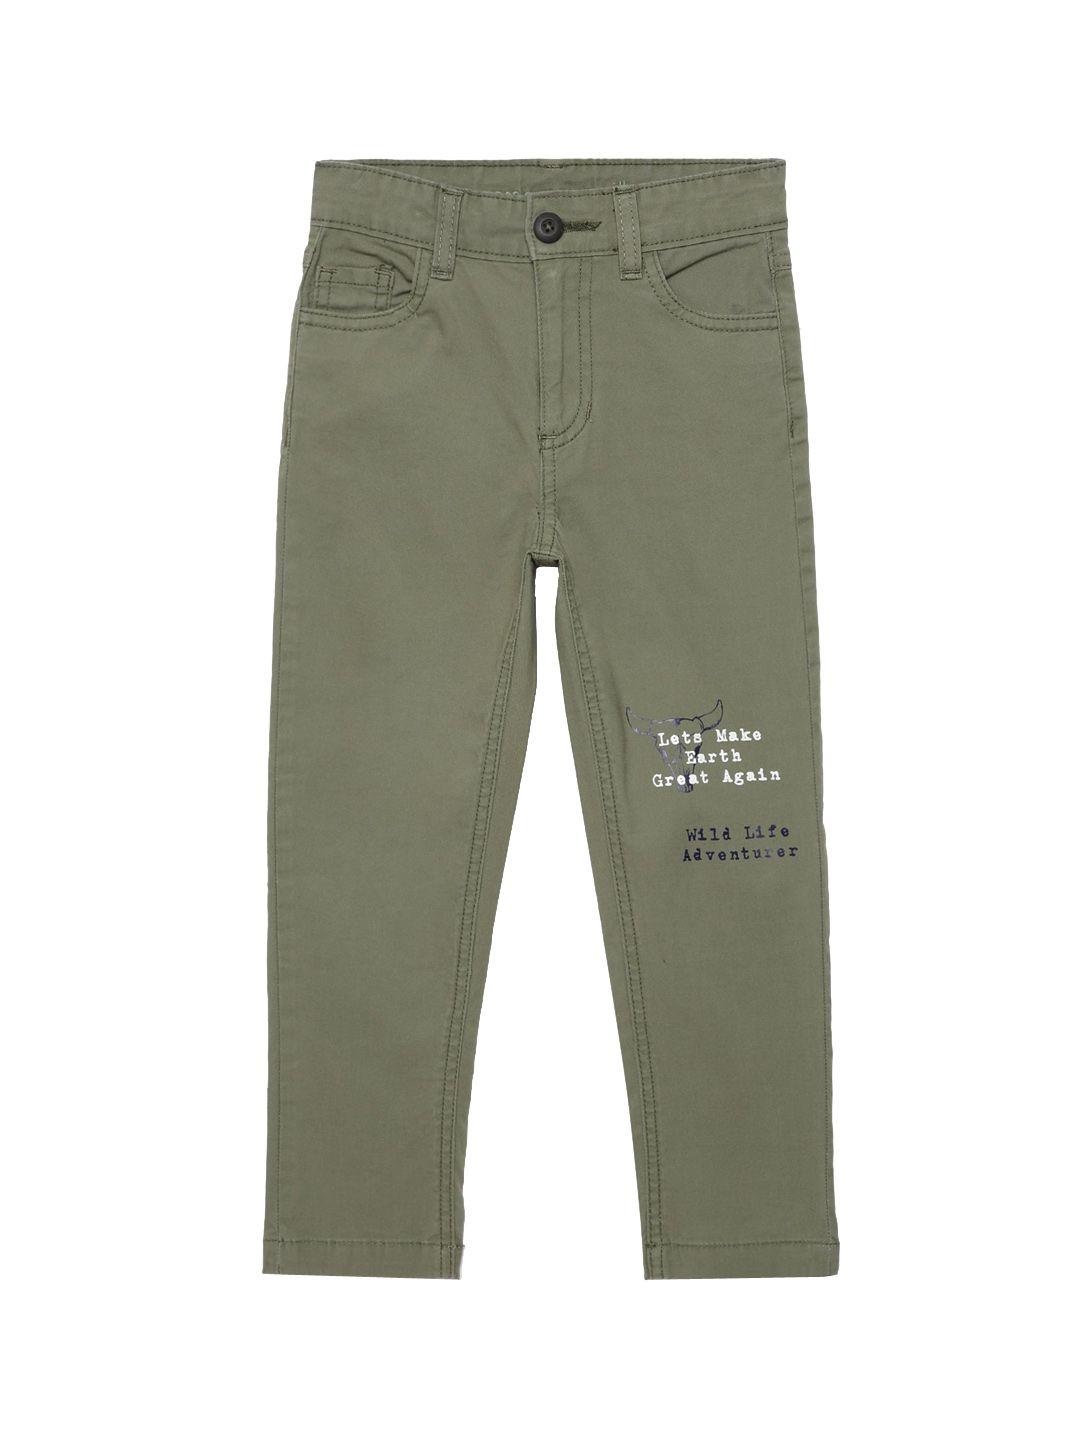 under-fourteen-only-boys-olive-green-slim-fit-trousers